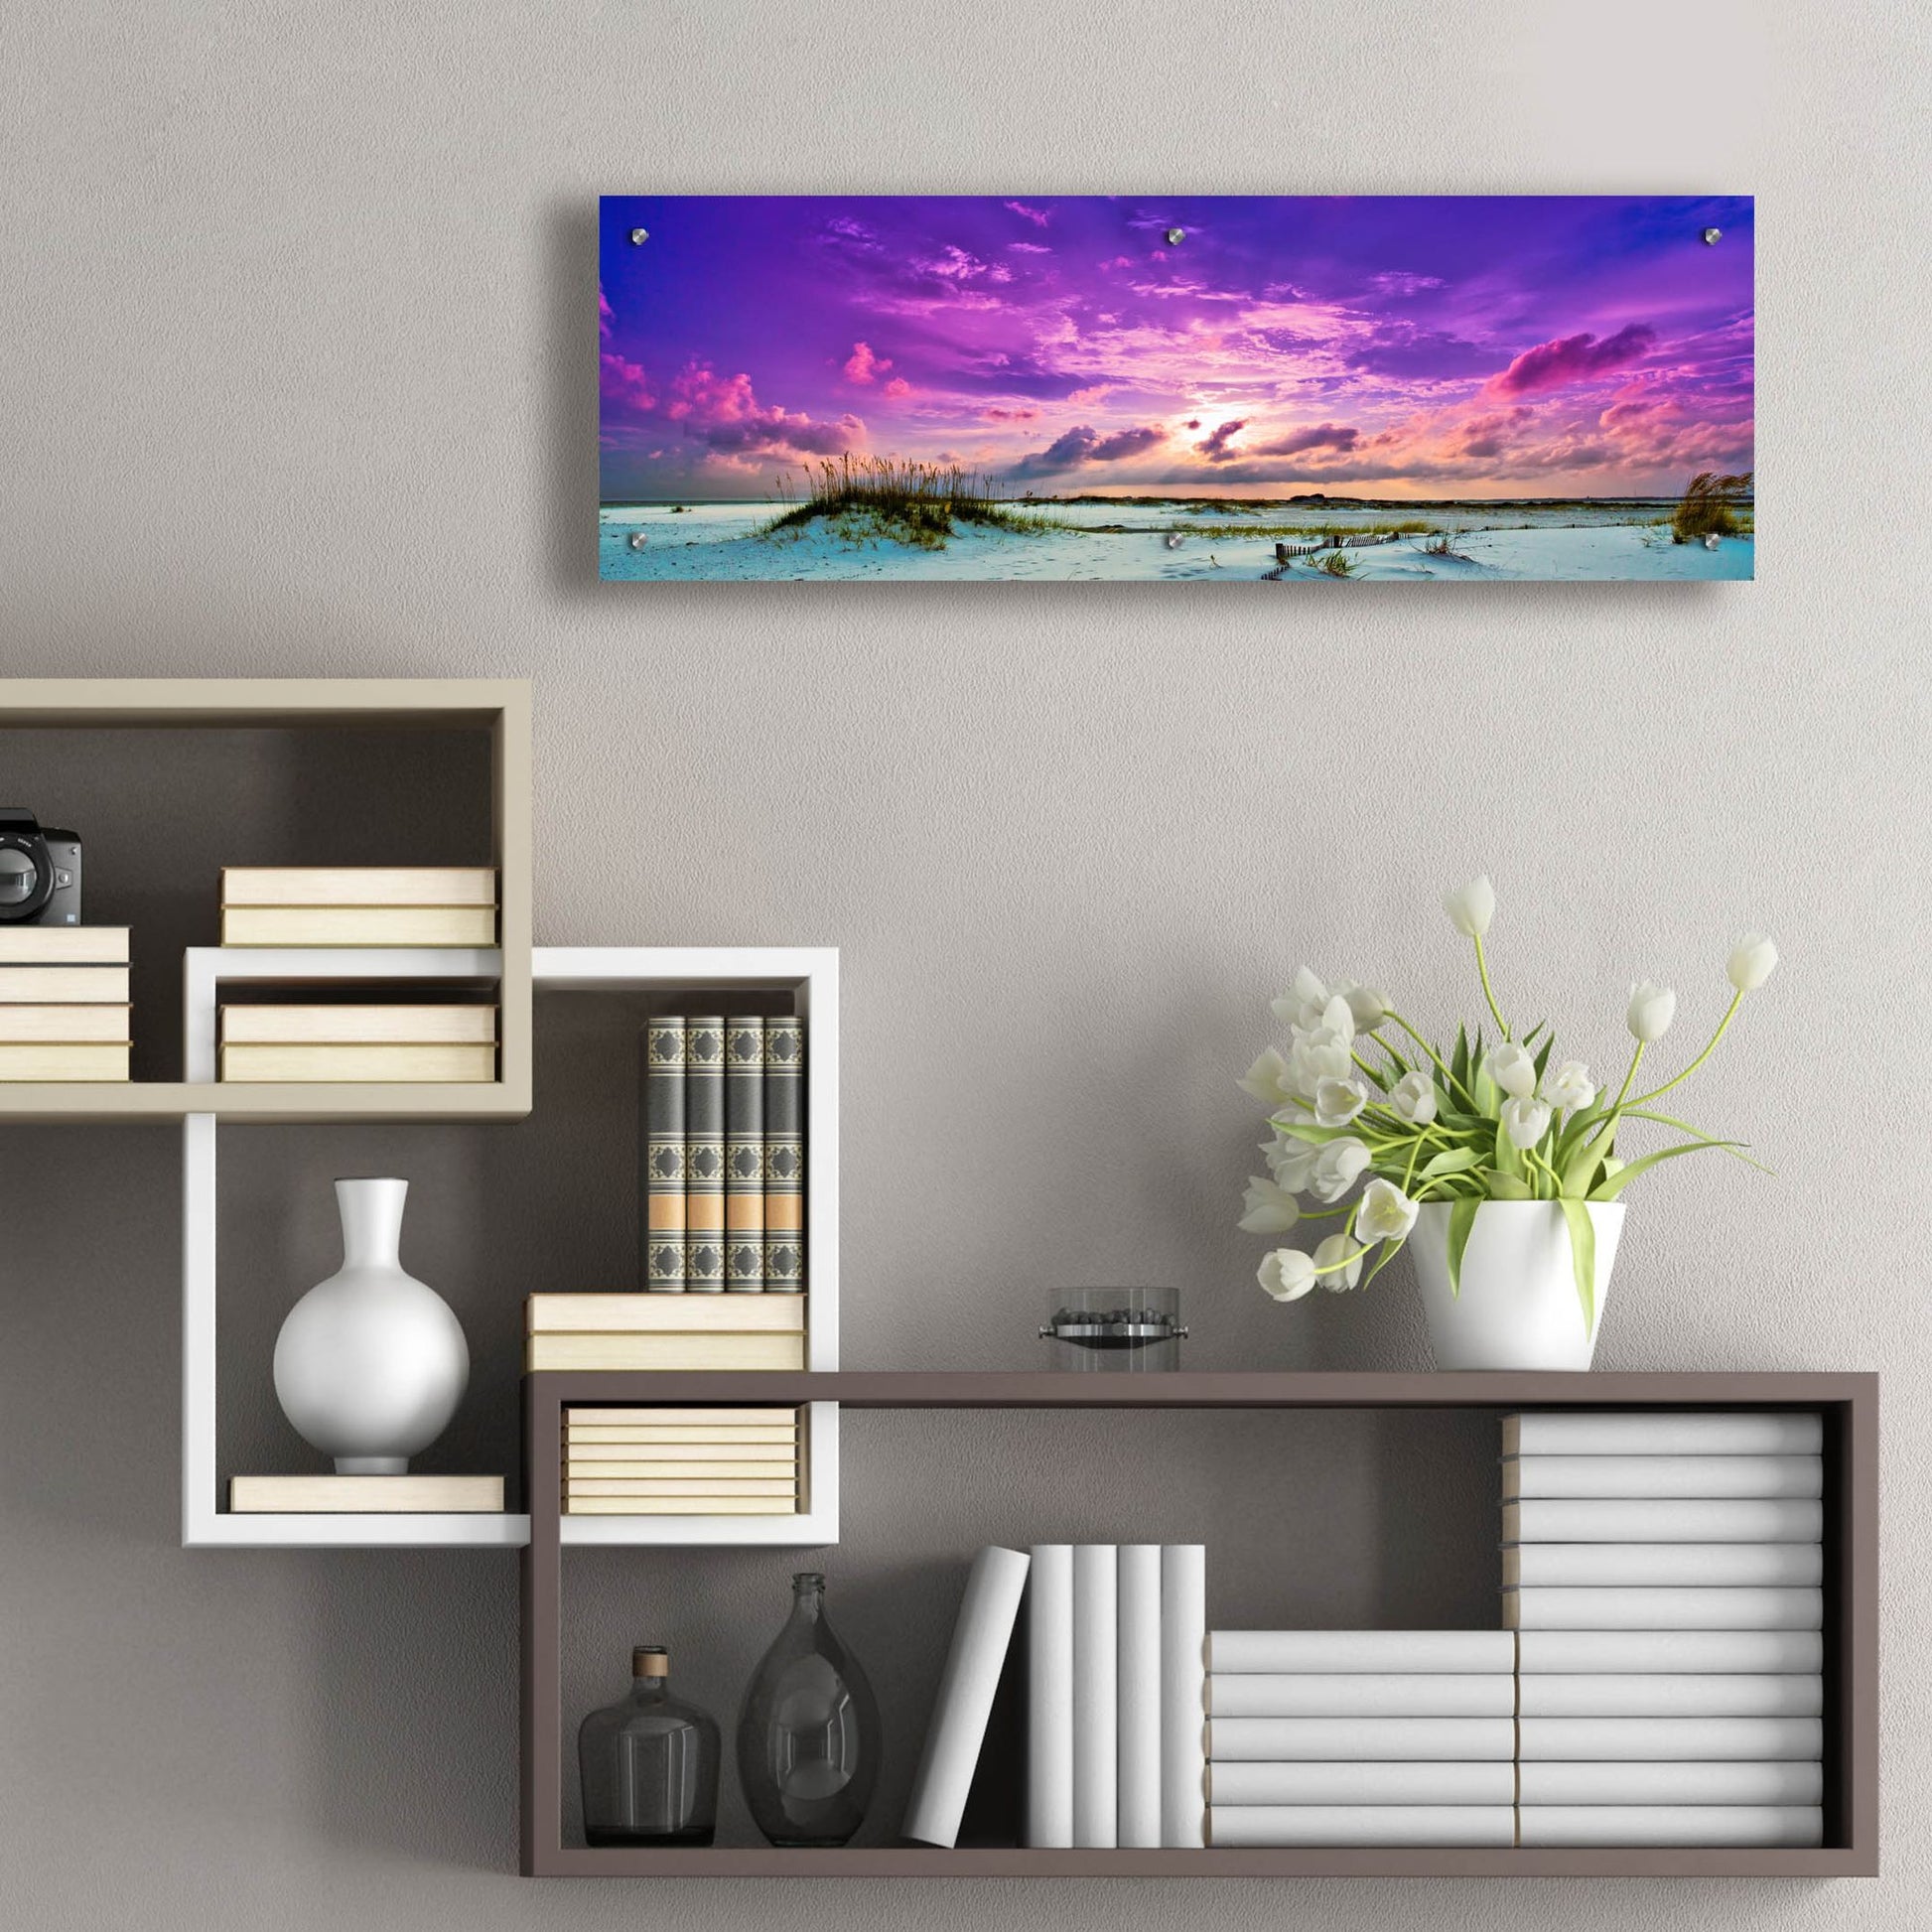 Epic Art 'Purple Clouds Skyscape Sunset Over Beach Sand Dune' by Ezra Tanner, Acrylic Glass Wall Art,36x12